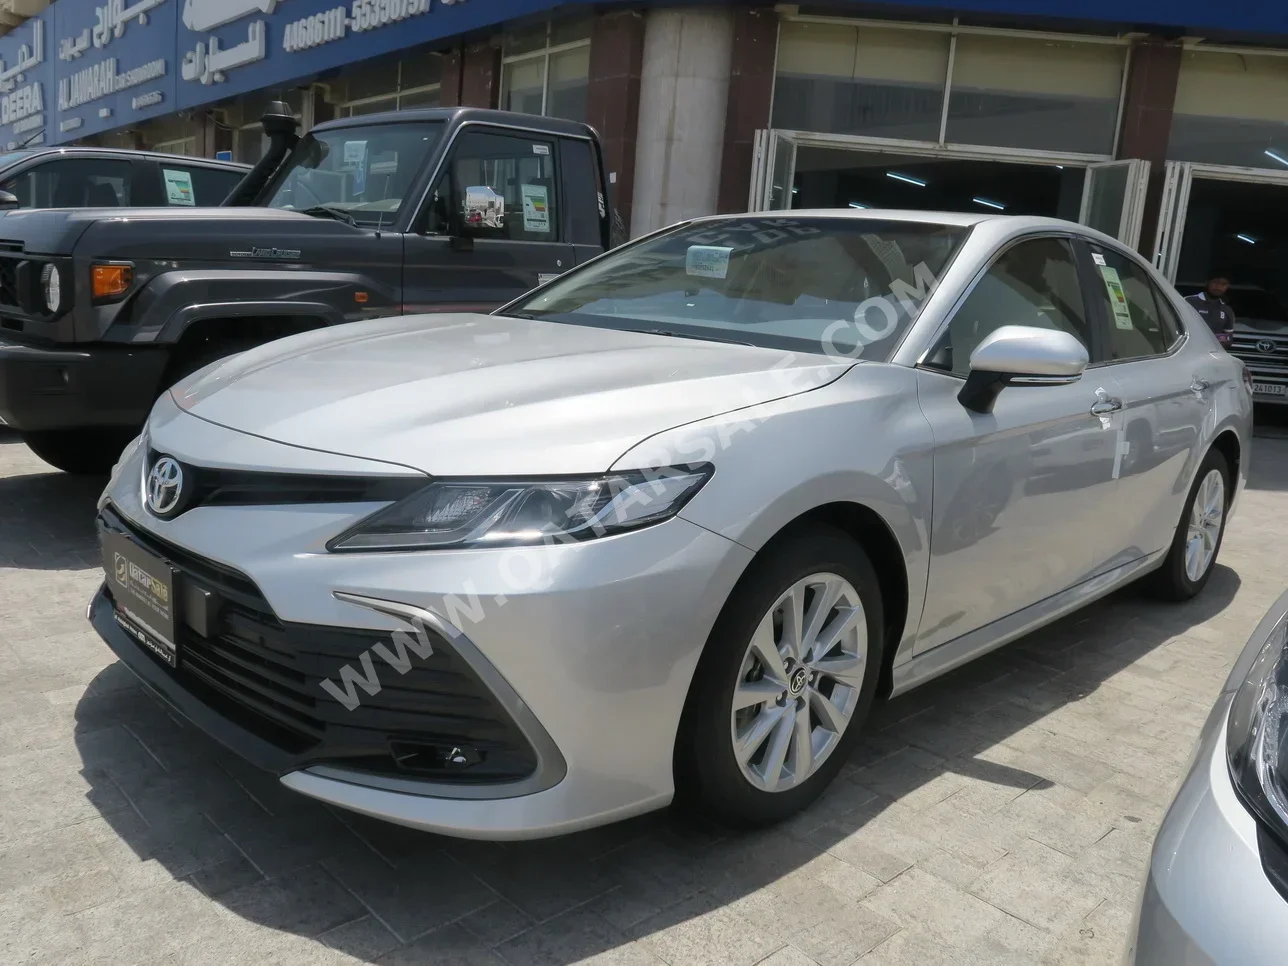 Toyota  Camry  GLE  2024  Automatic  0 Km  4 Cylinder  Front Wheel Drive (FWD)  Sedan  Silver  With Warranty